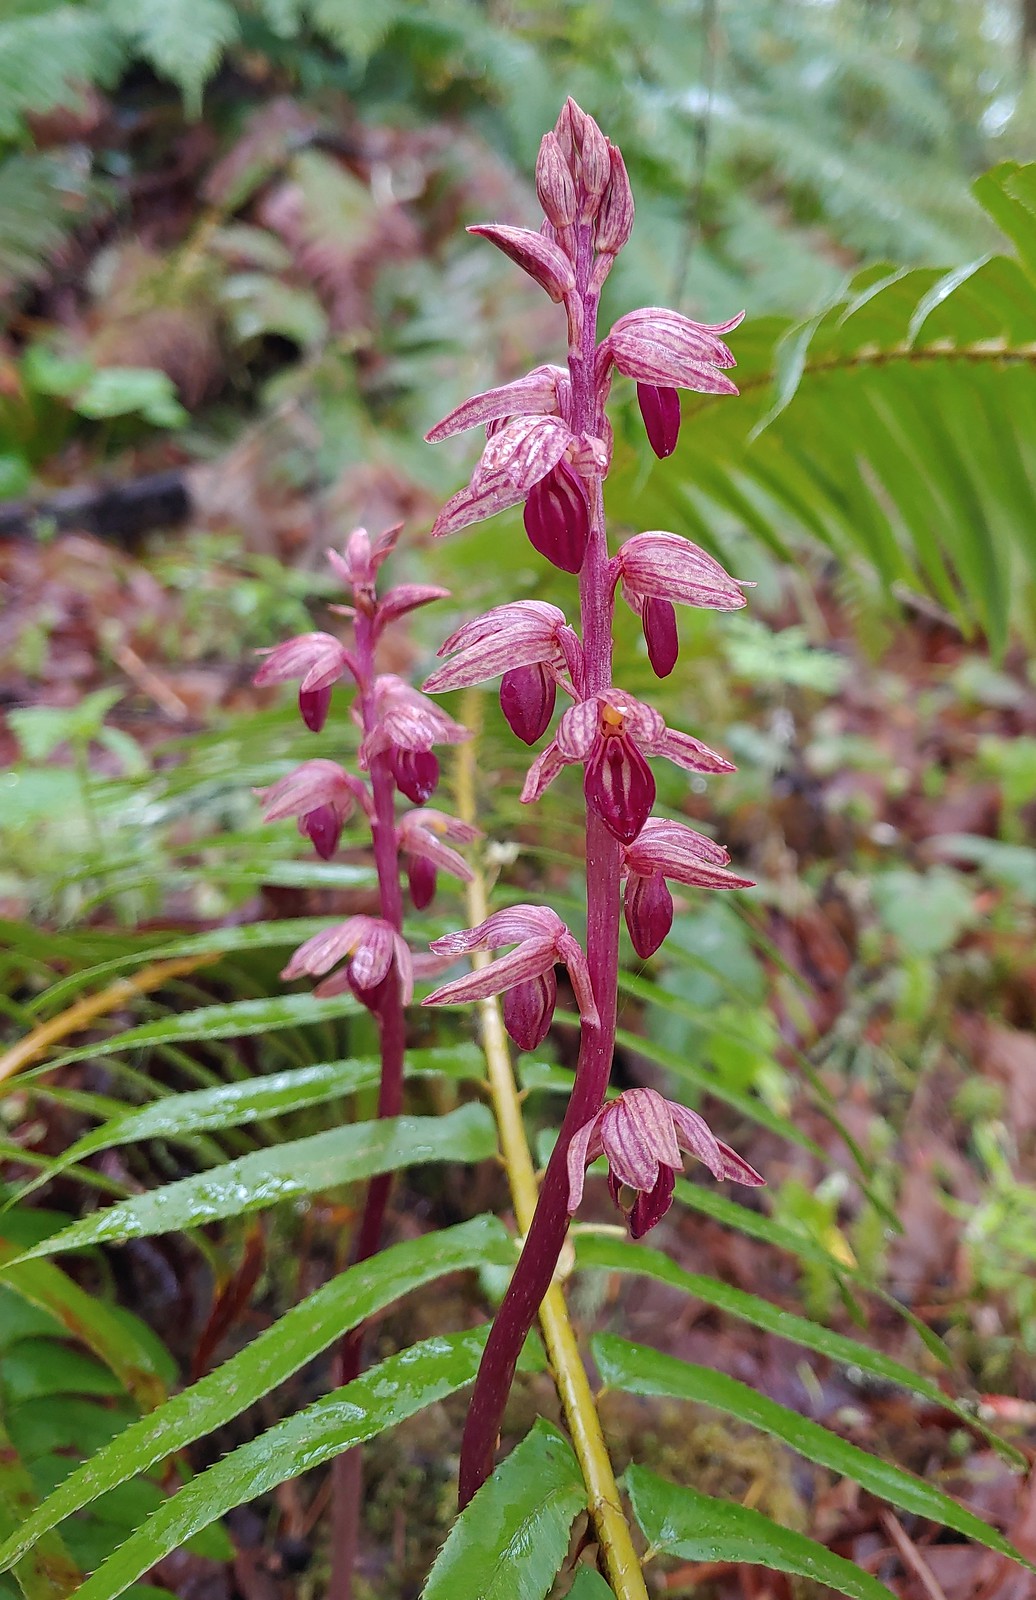 Striped coralroot